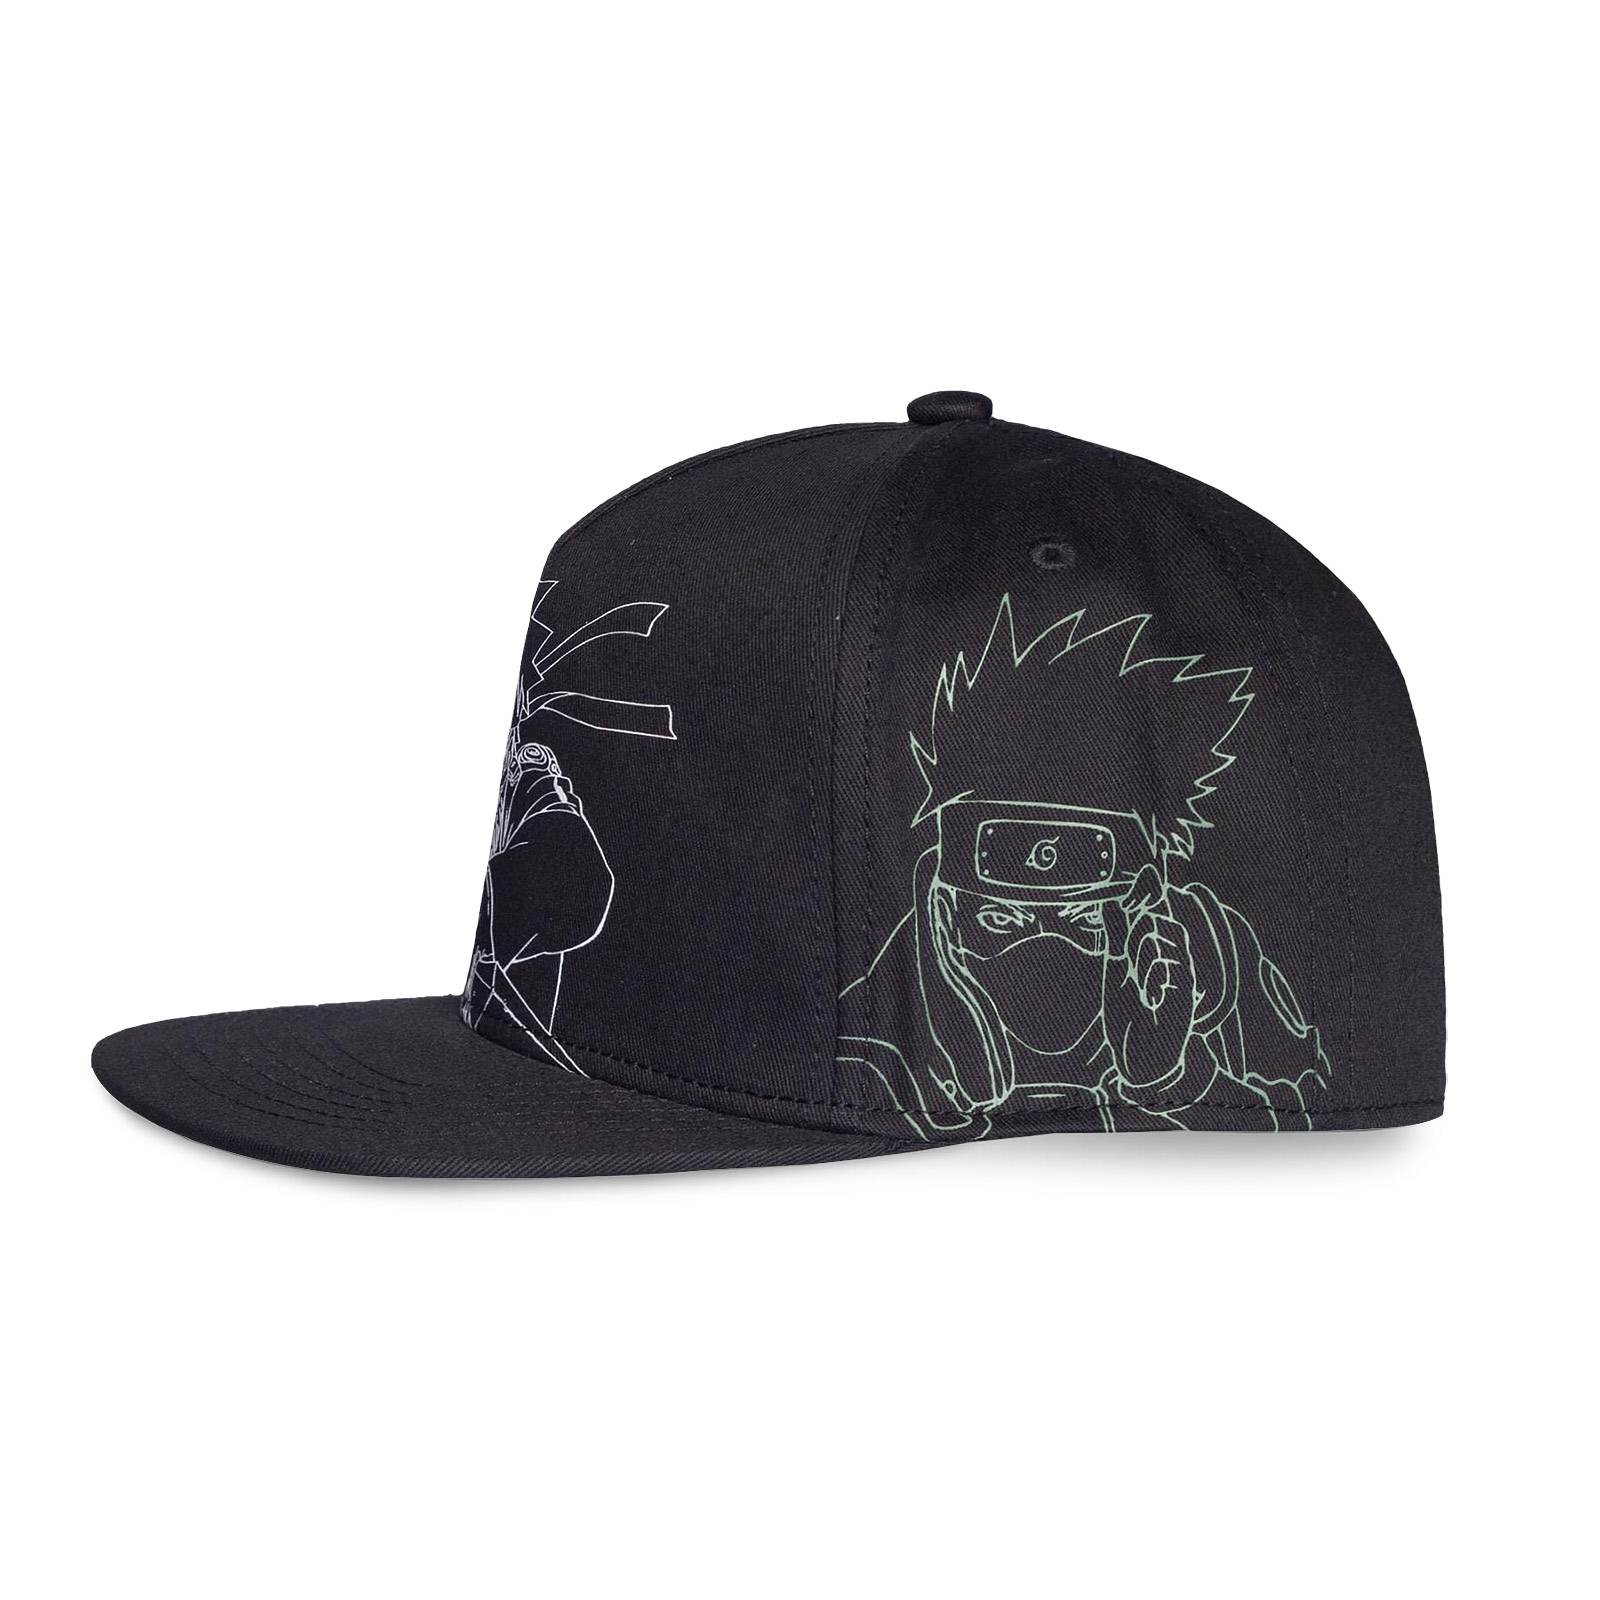 Naruto Shippuden - Outline Characters Snapback Cap